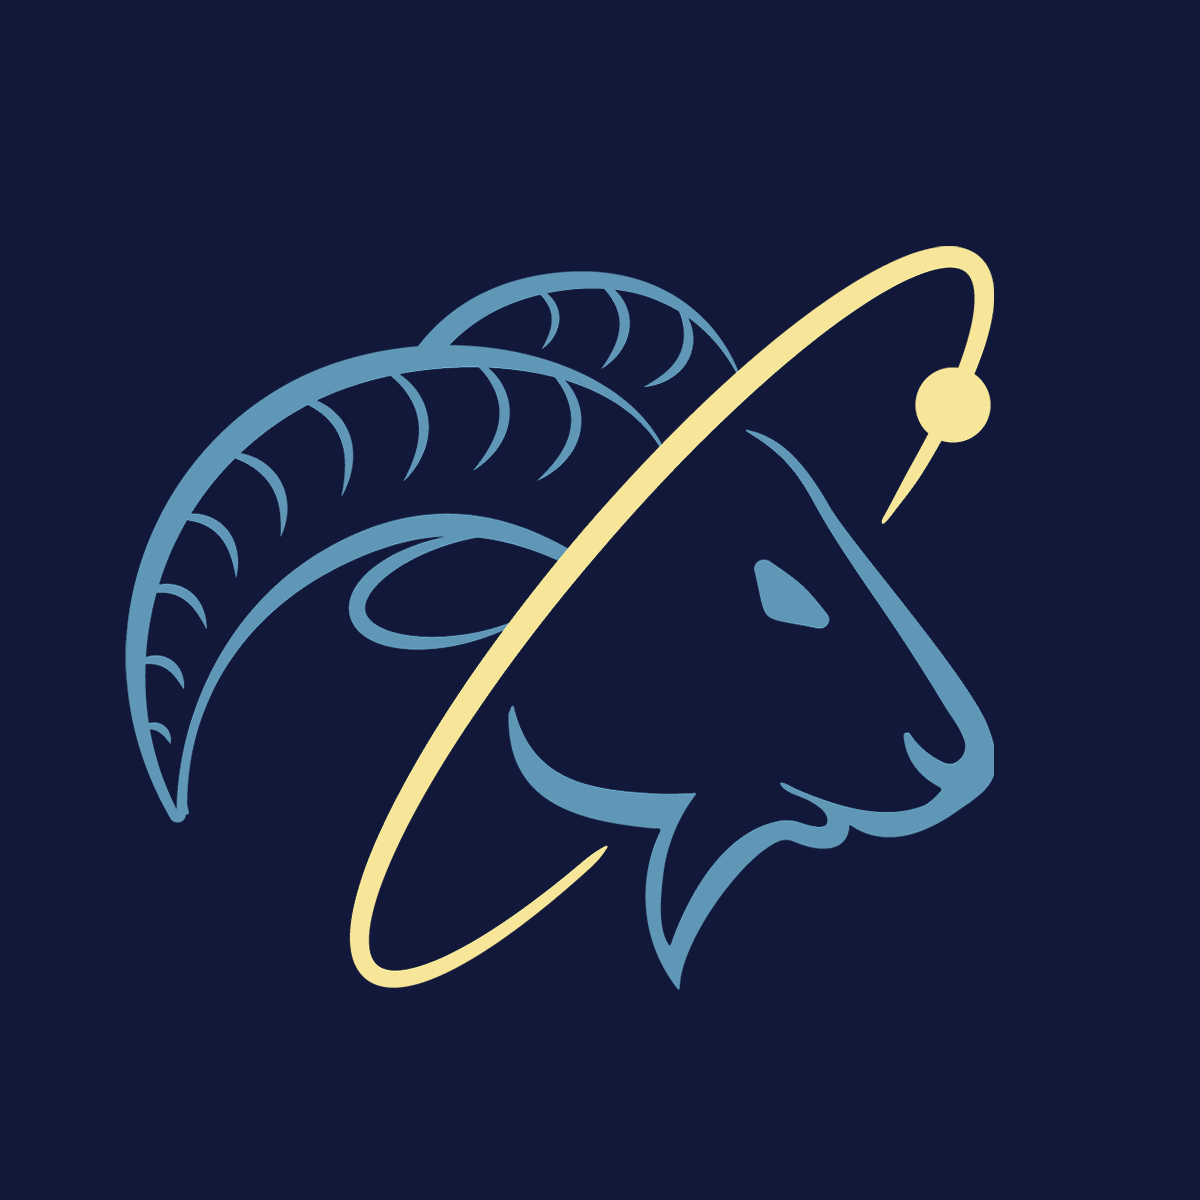 GOATcast - Global e-commerce and FBA with SPACEGOATS